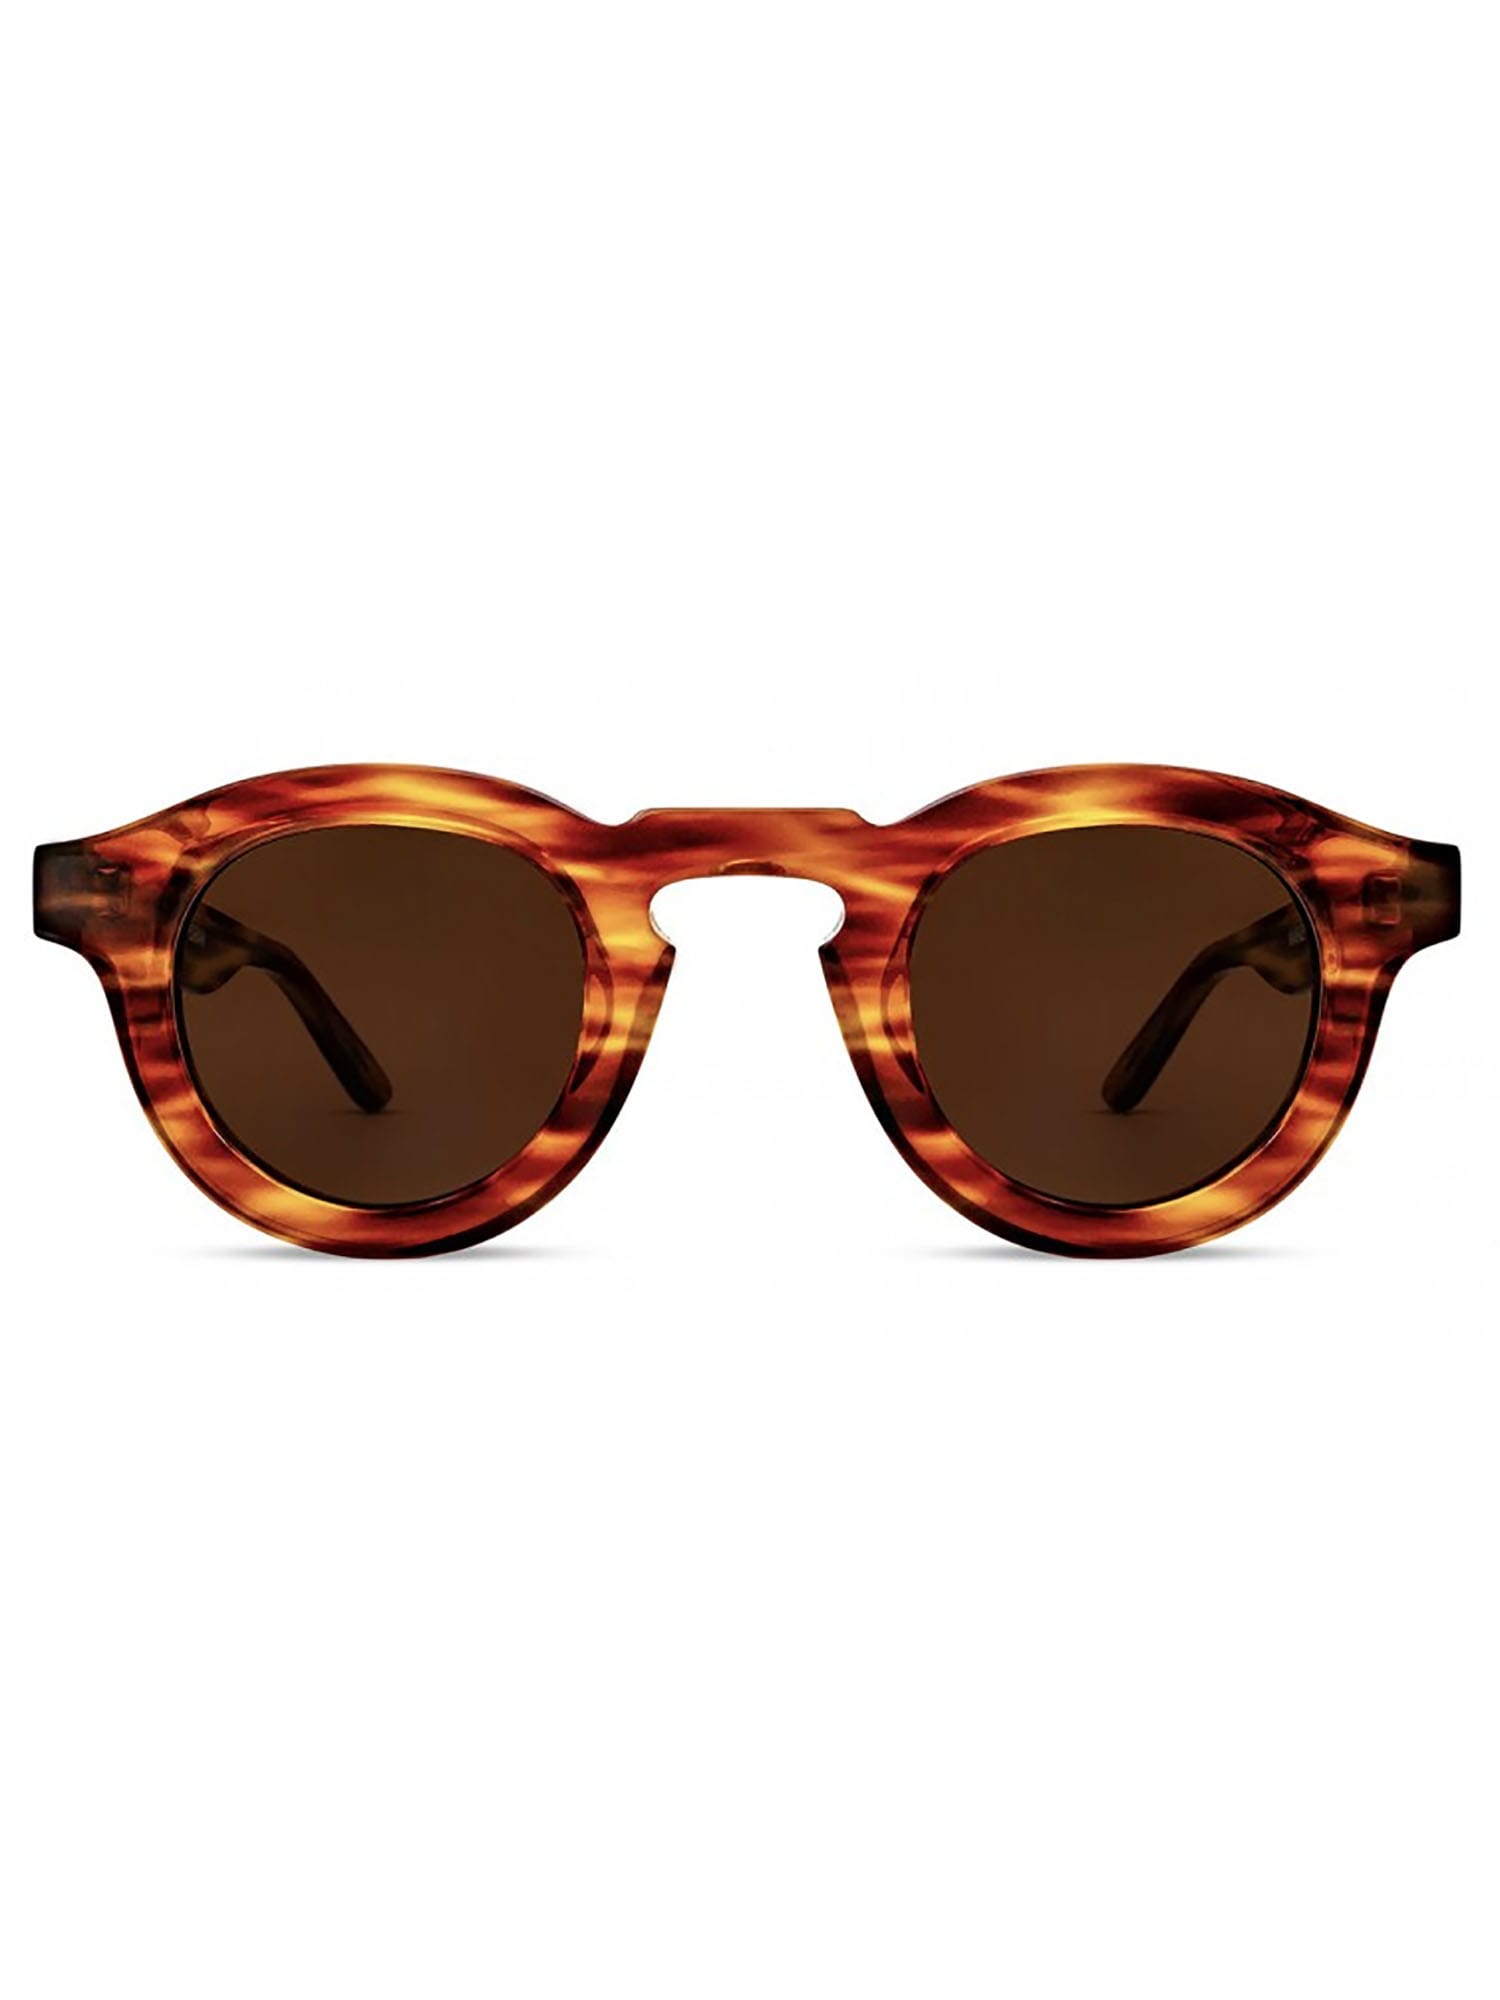 Thierry Lasry 1fny4mb0a